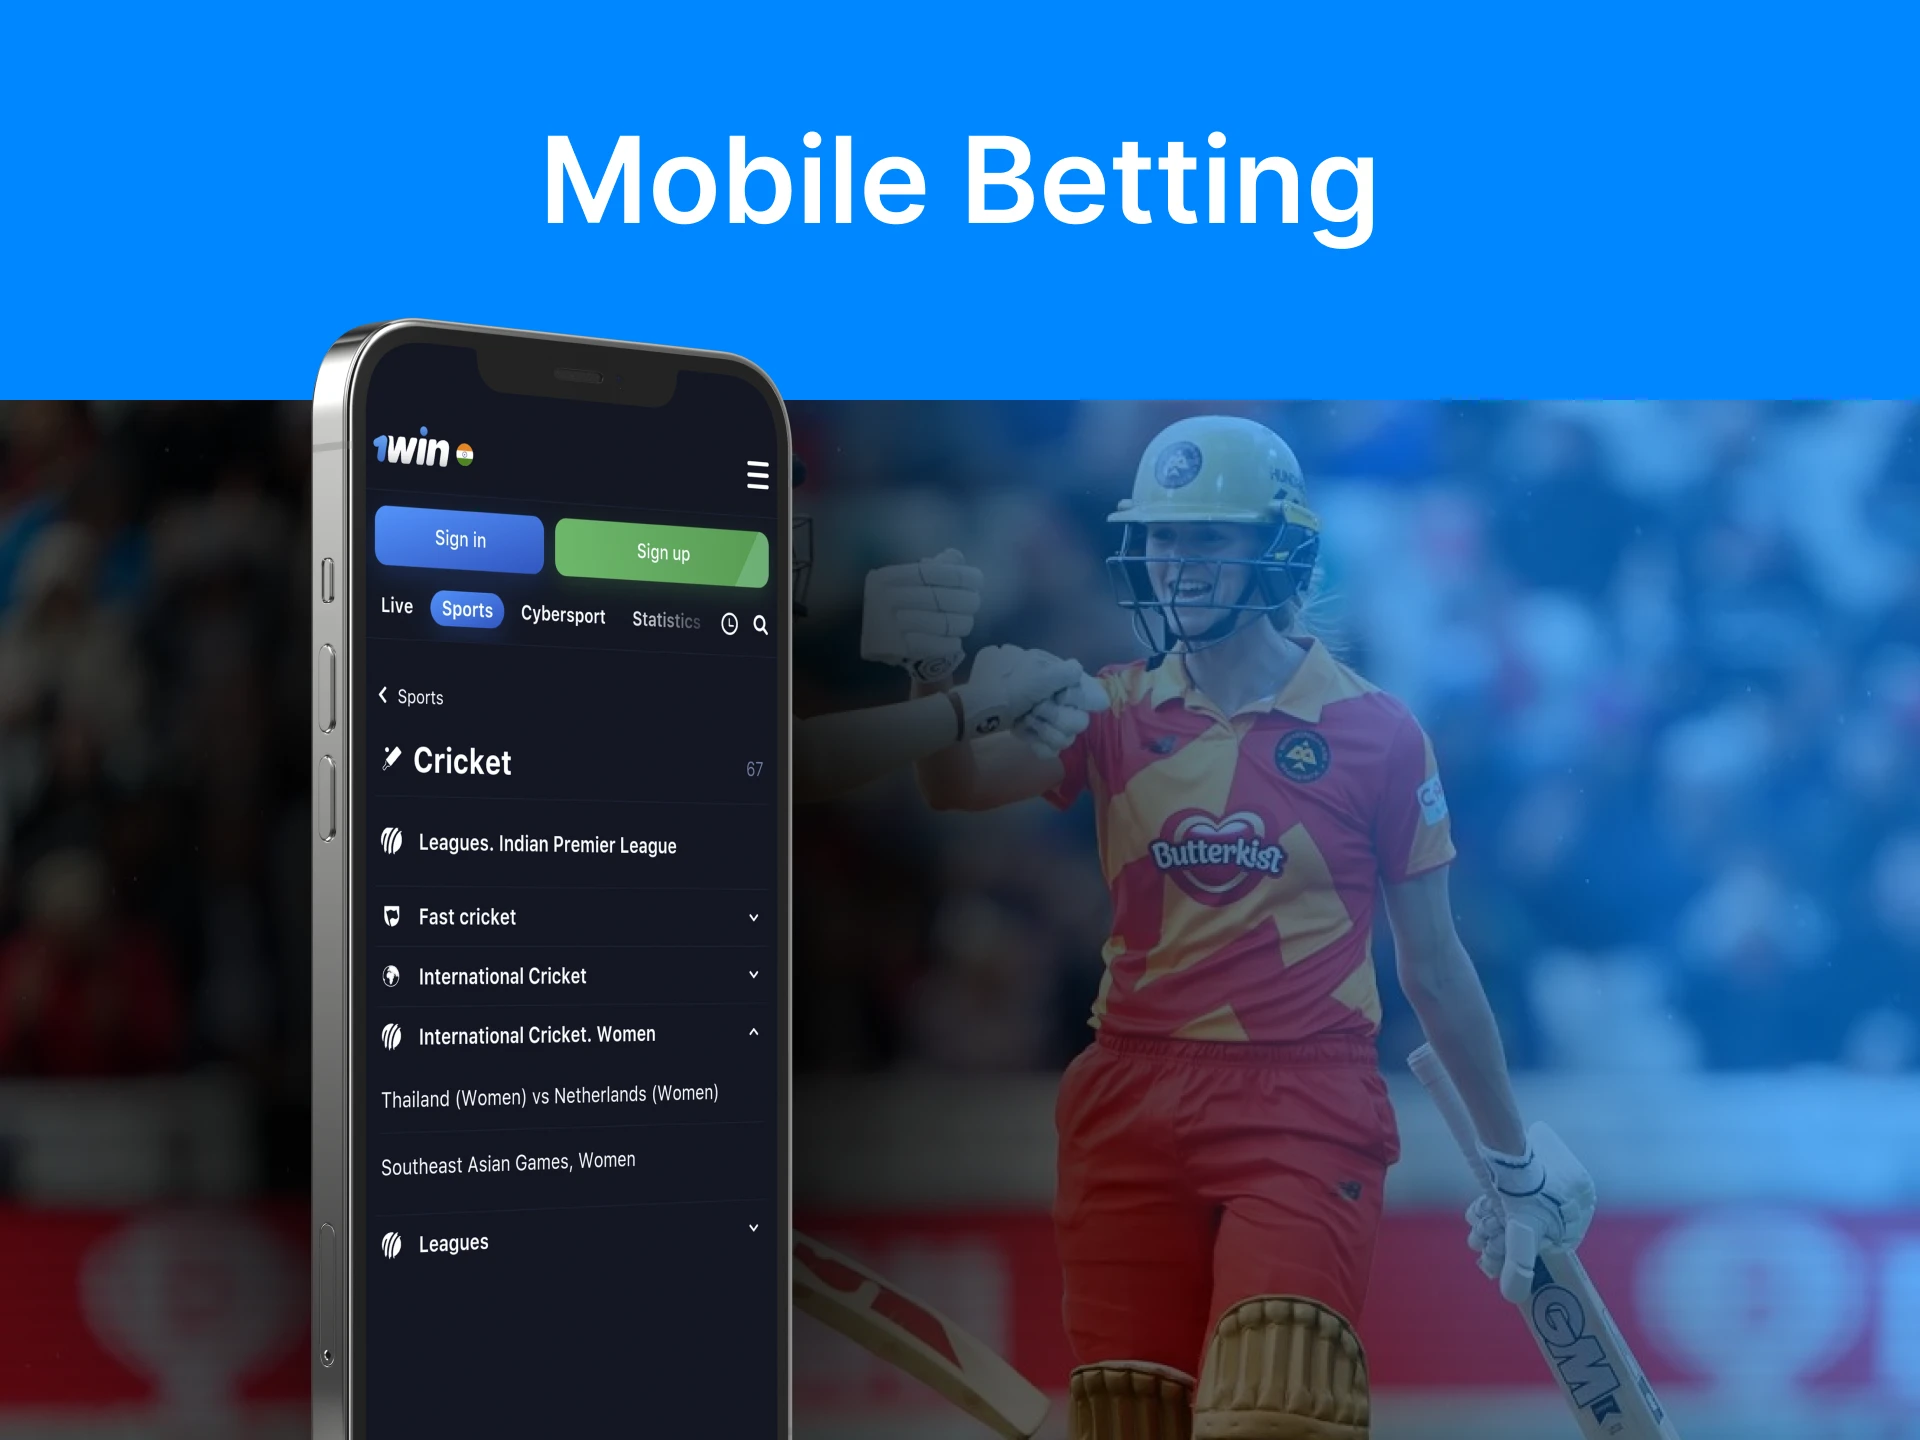 Bet on The Hundred matches using your mobile device.